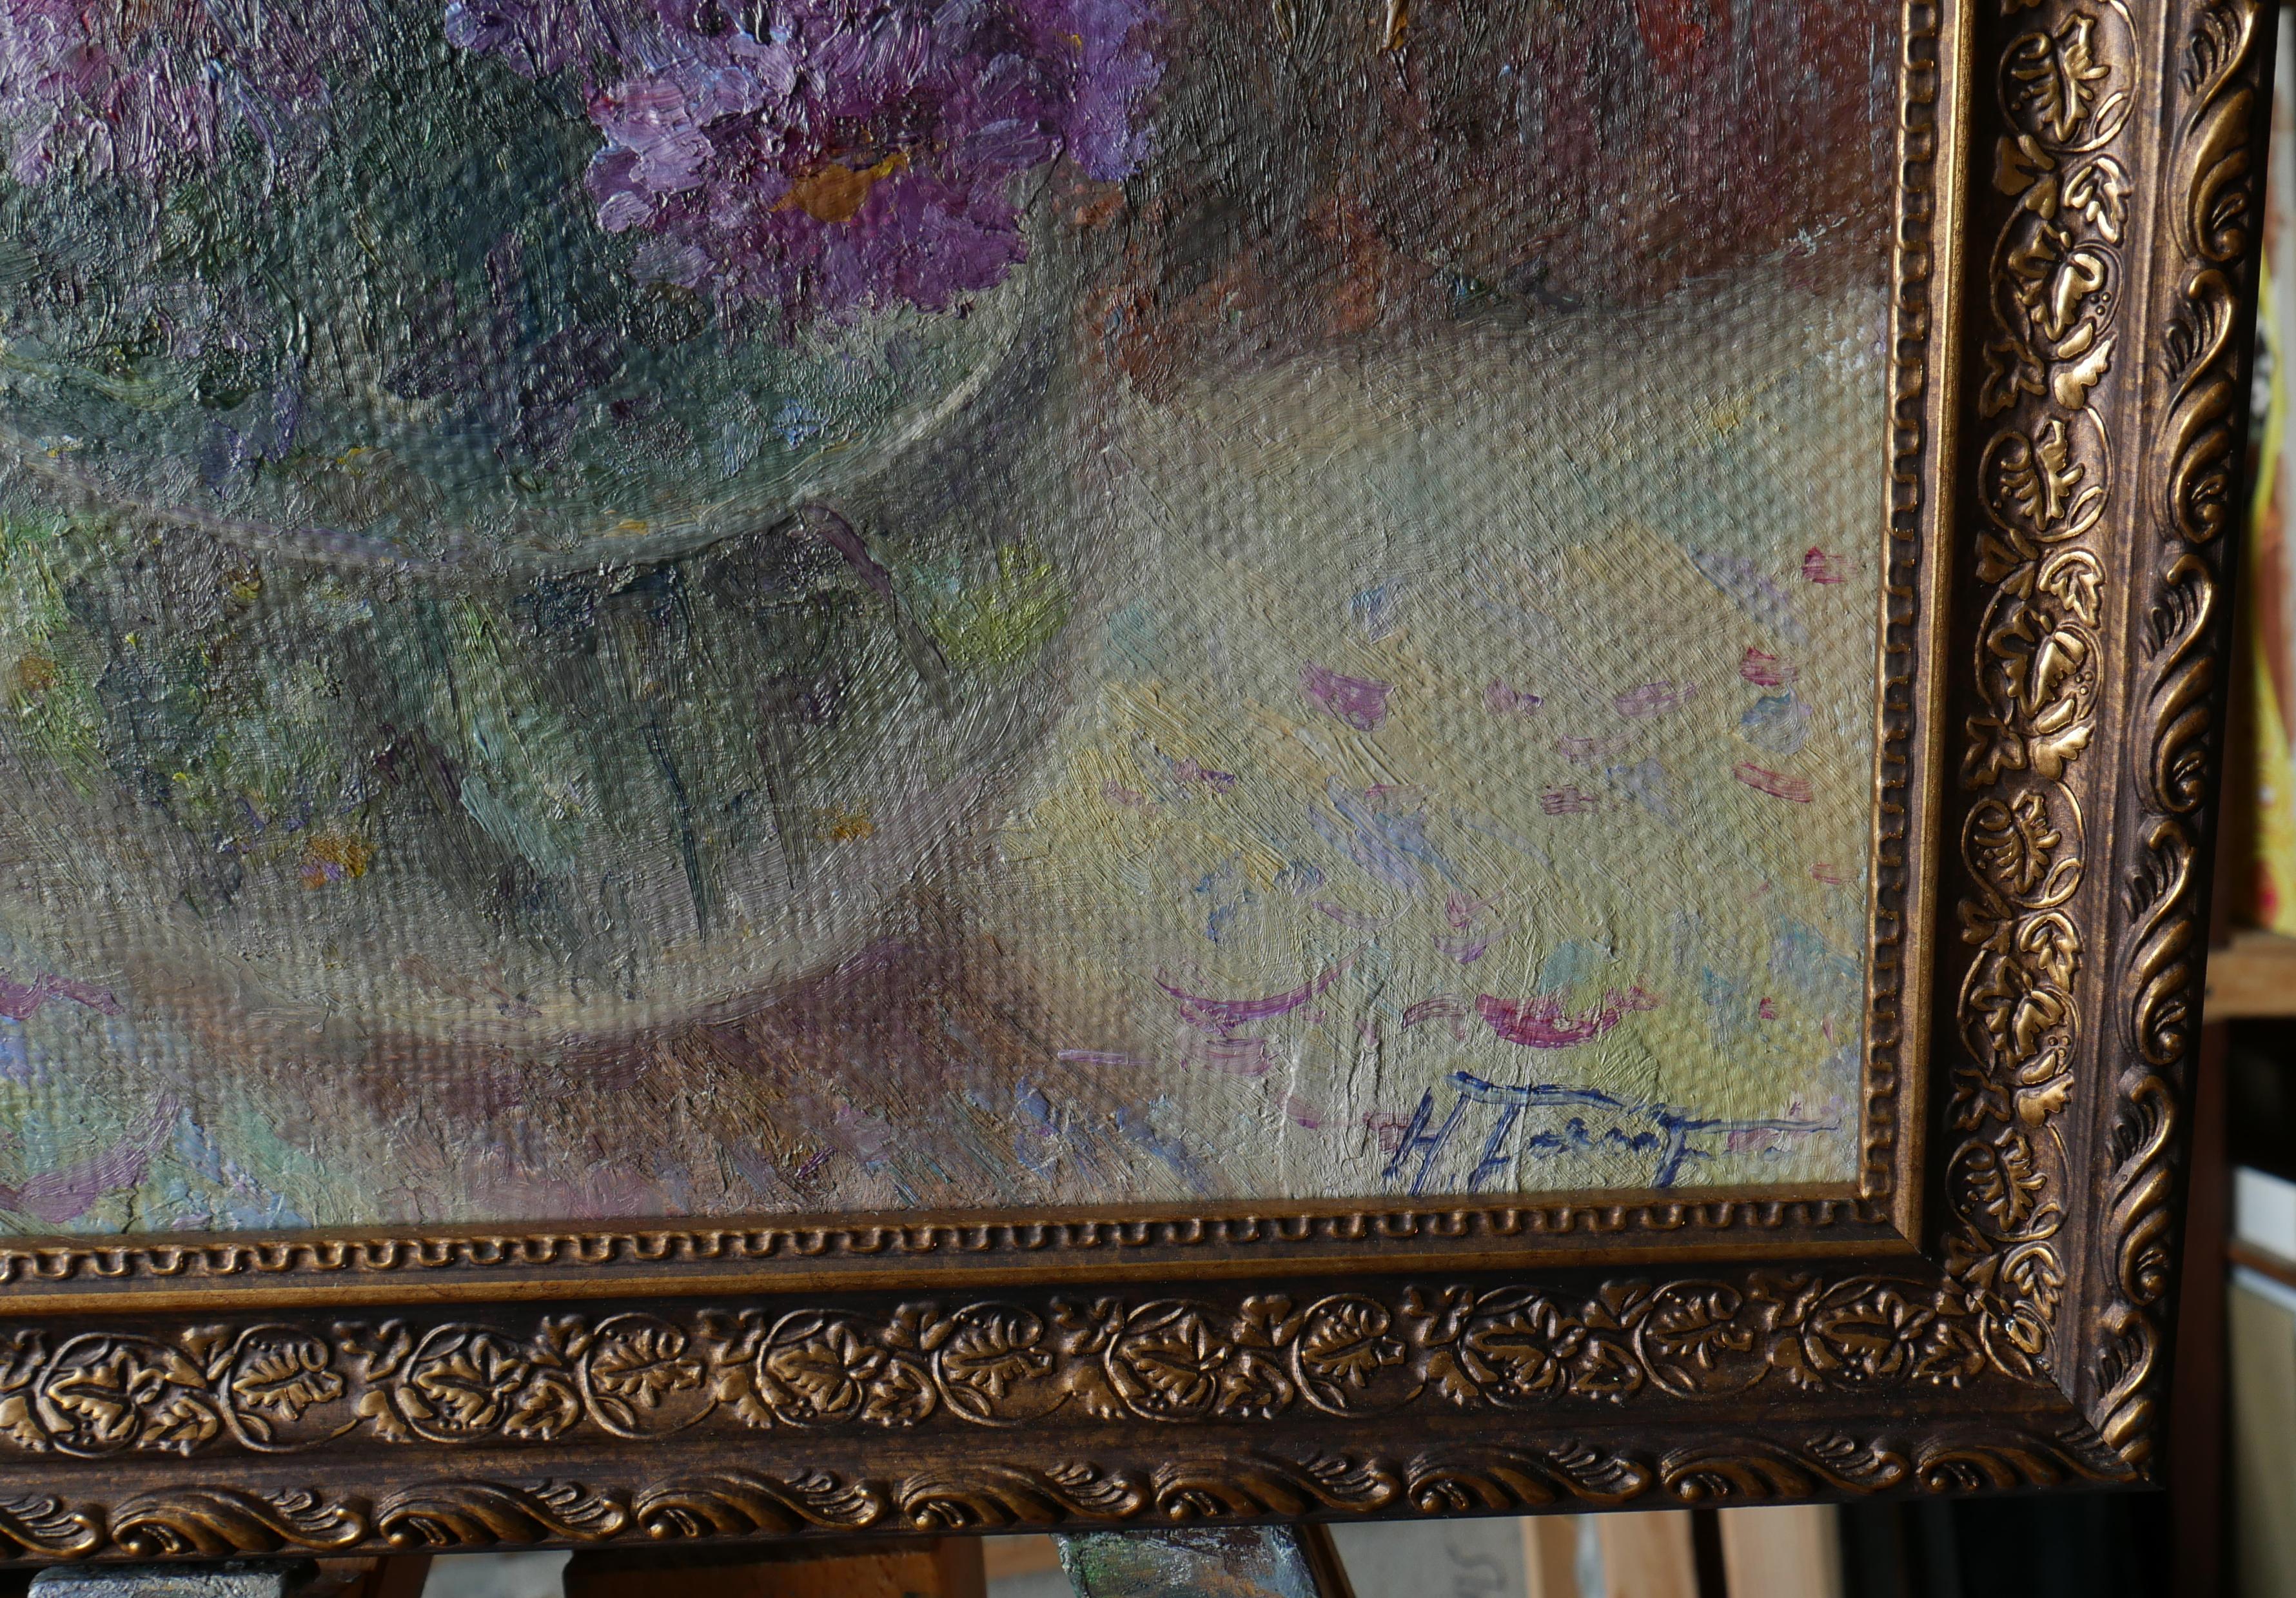 Painting with Purple Flowers is a beautiful wall decor, october flowers are one of favorite flowers of the artist, he always tries to show their beauty and luxury. Beside, Nikolay likes different shades of purple colors.

The painting is 100% hand